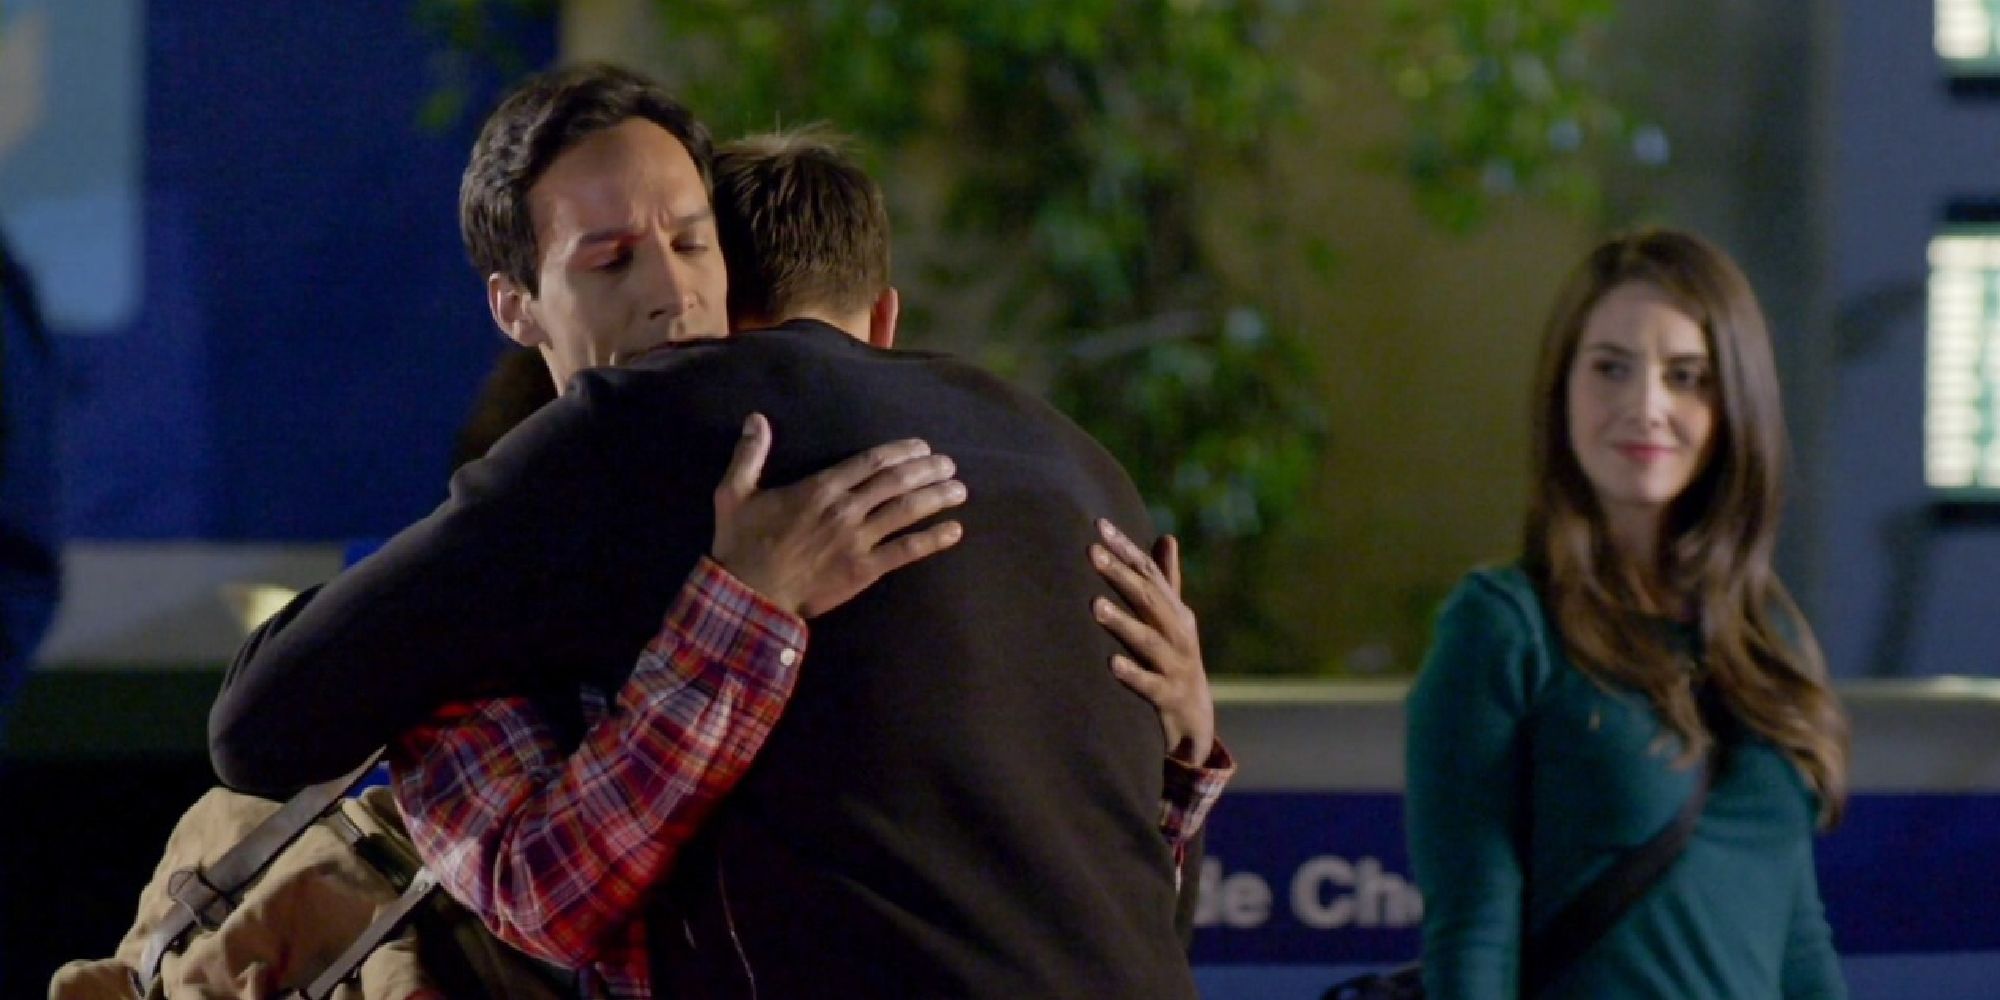 Jeff hugs Abed goodbye while Annie watches in the Community finale